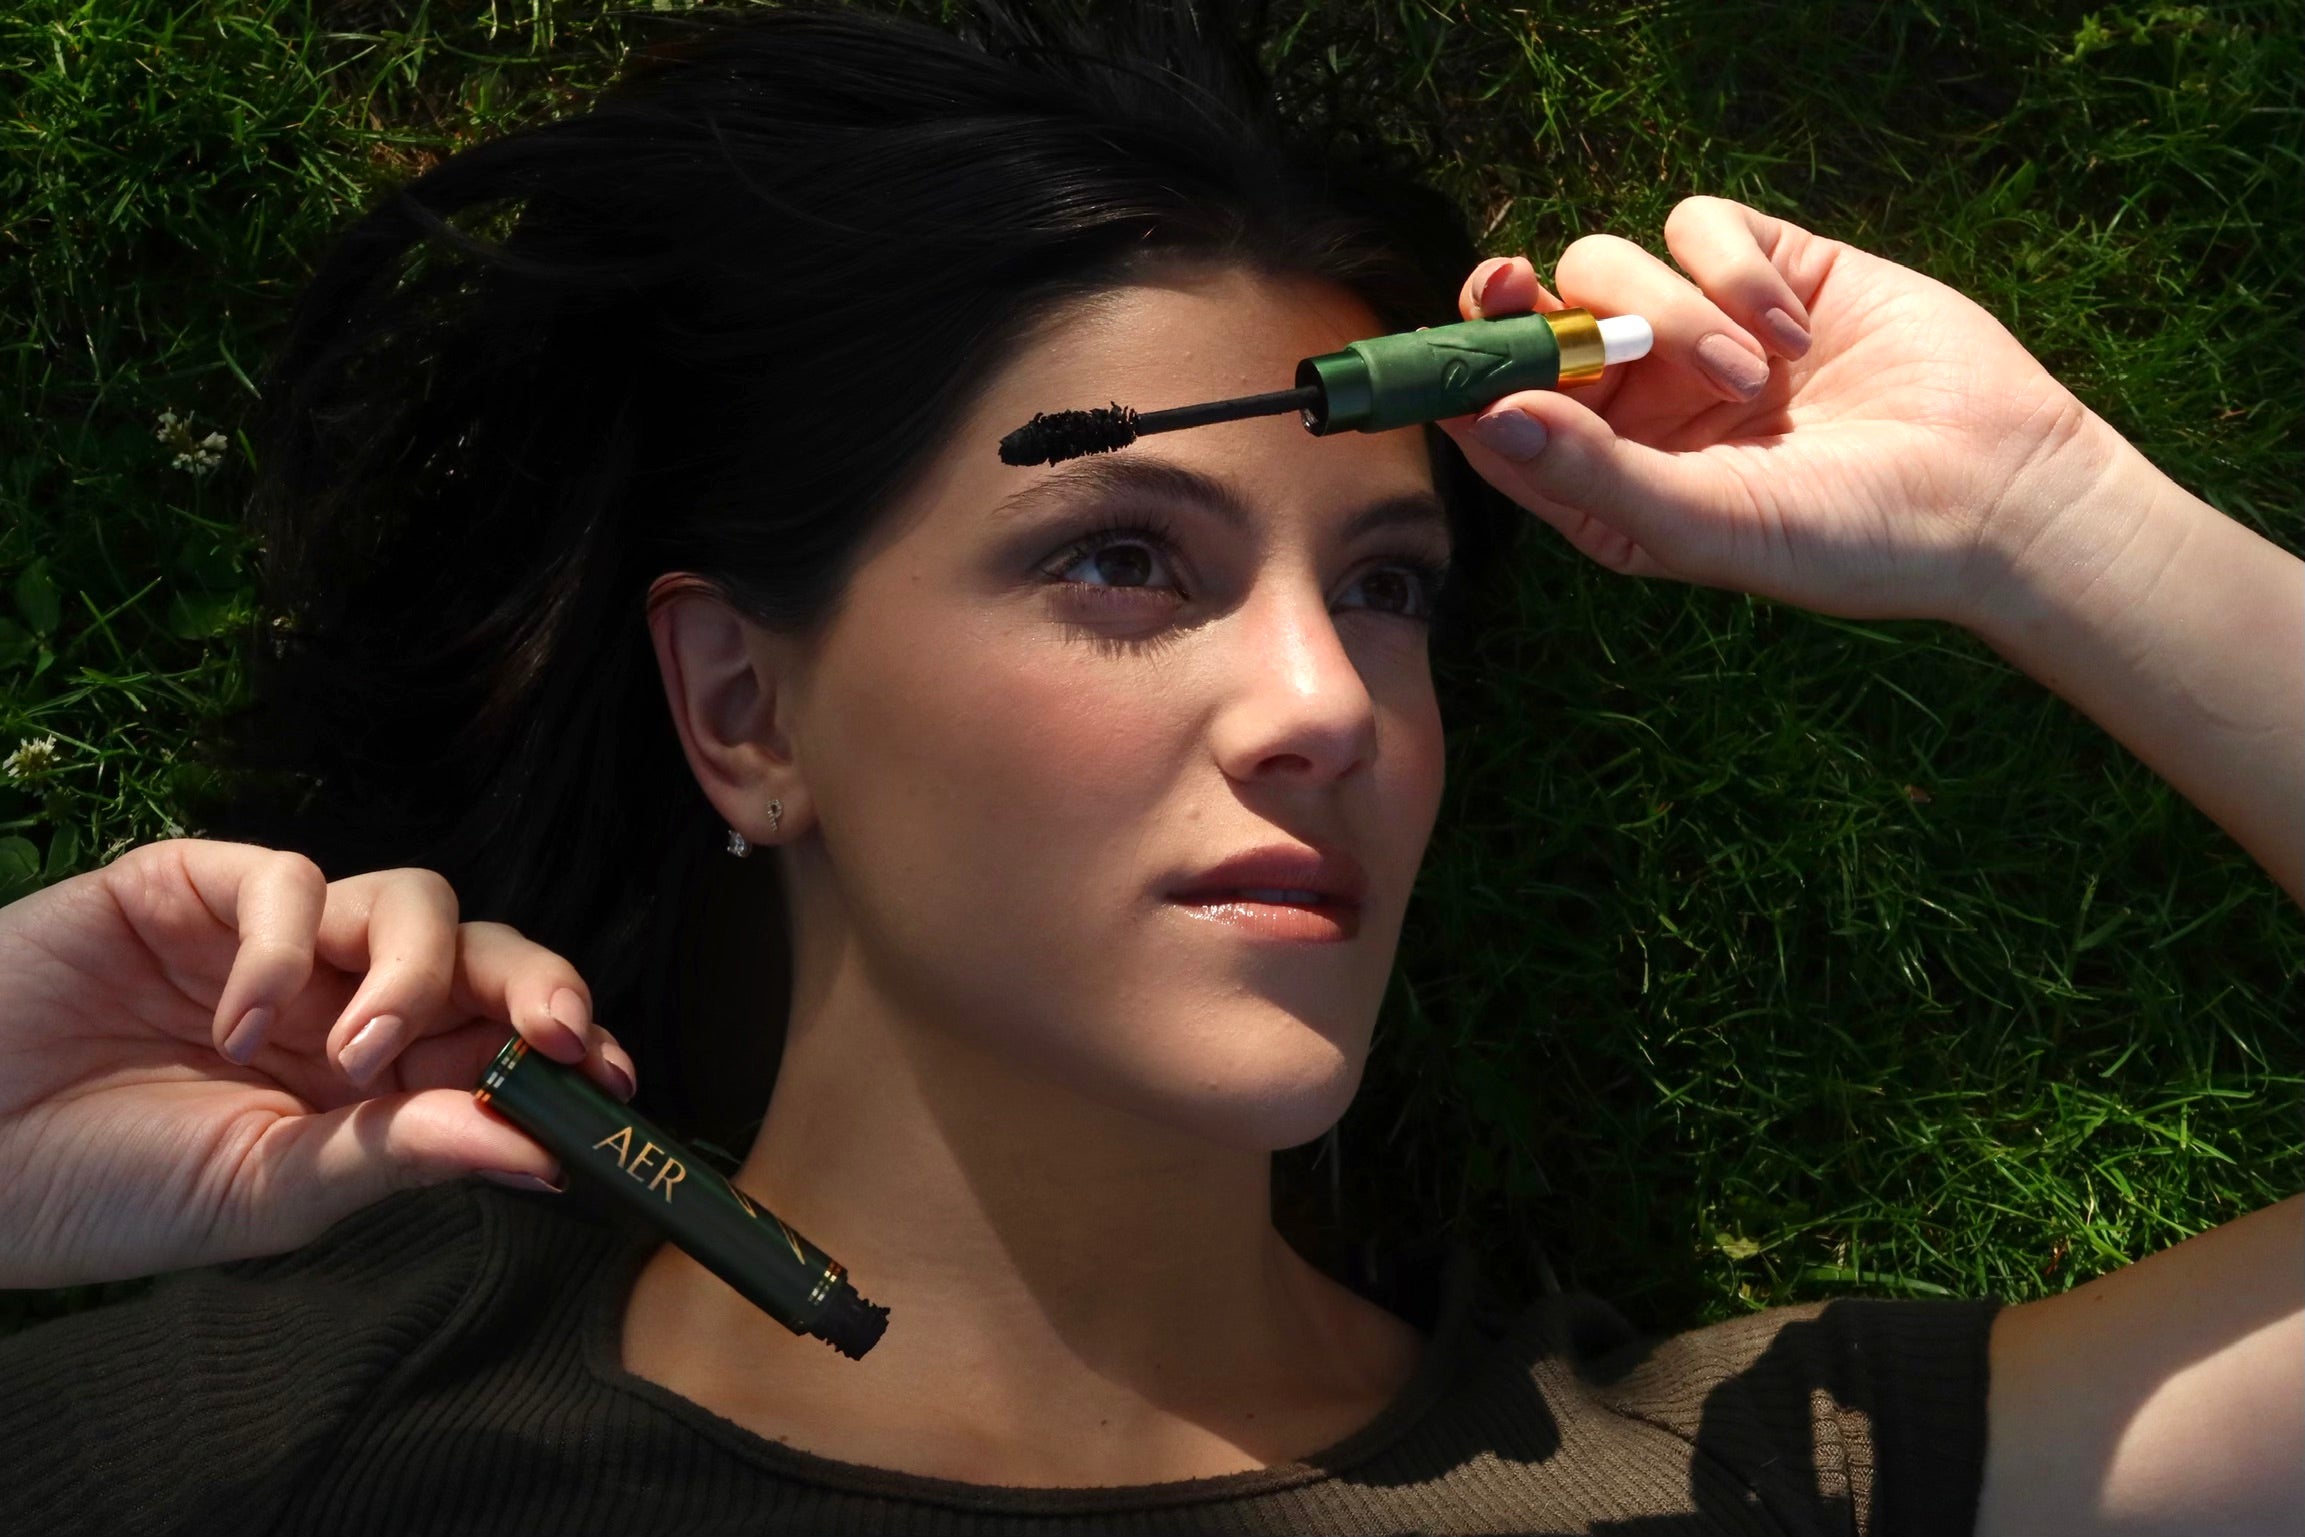 Paige laying in the grass holding her Aer Cosmetics mascara container. Photo credit to Honor Goldberg